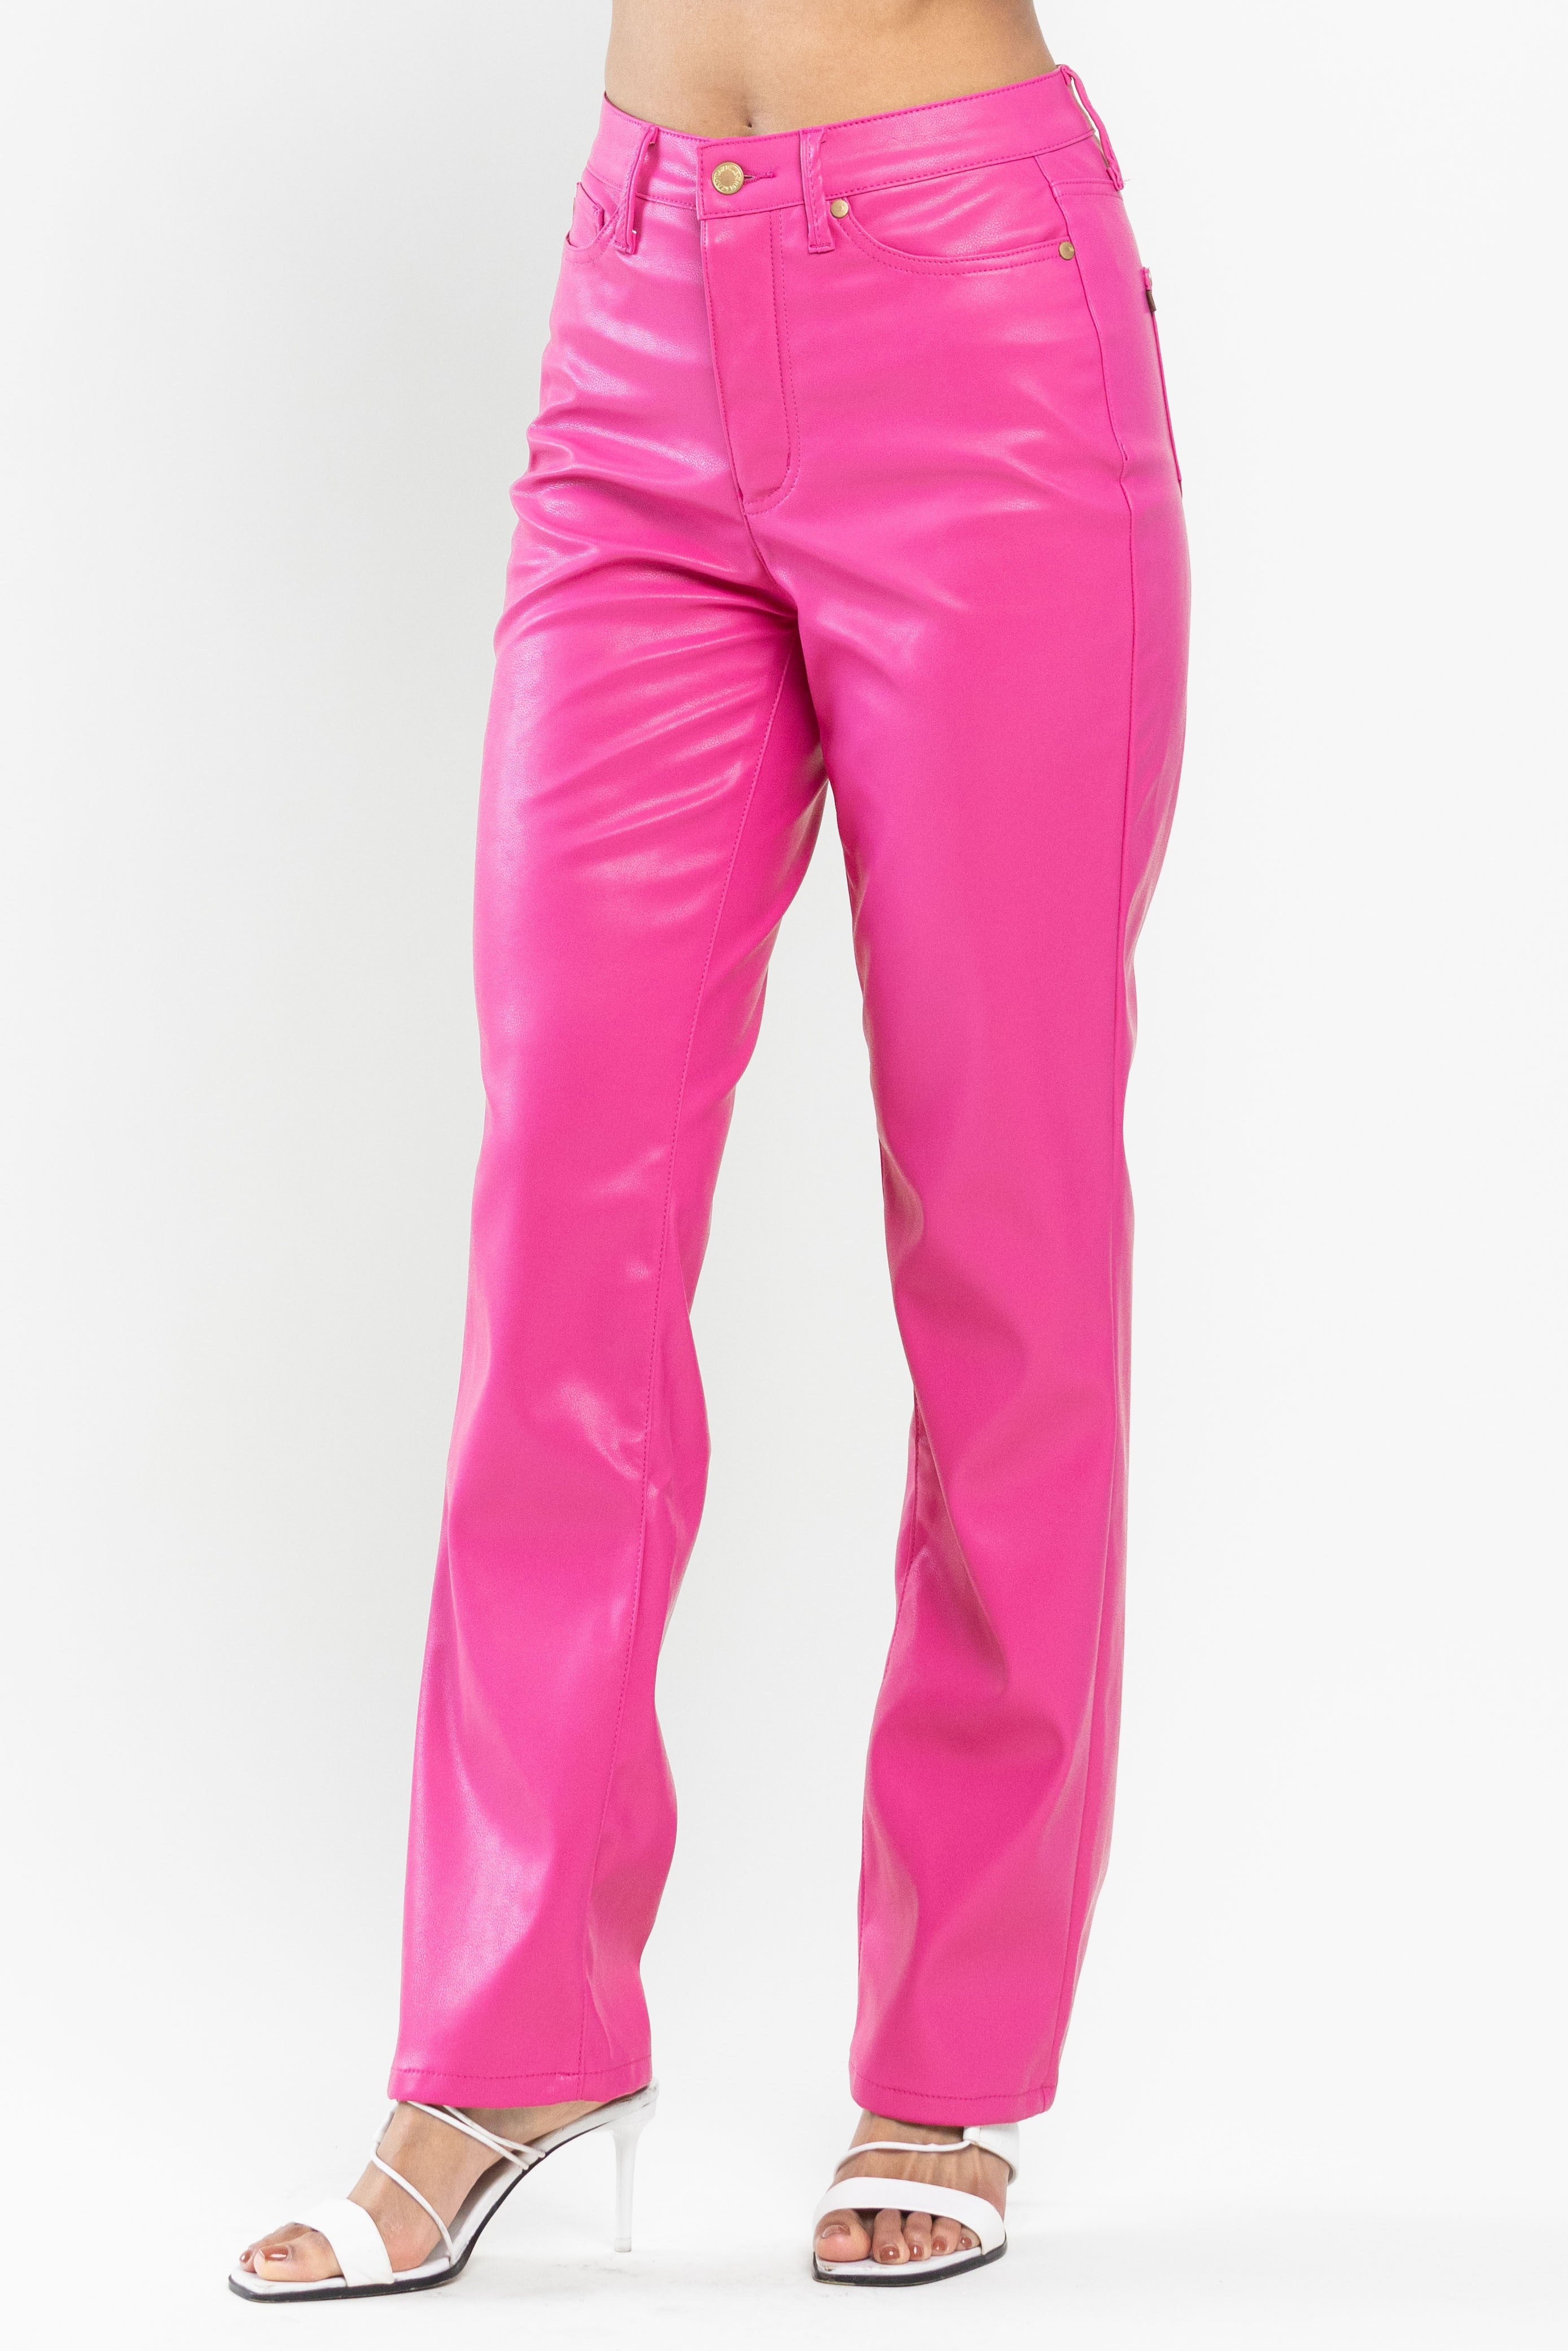 Judy Blues Blue Pink Faux Leather Straight High Waist Tummy Control Pant Pants